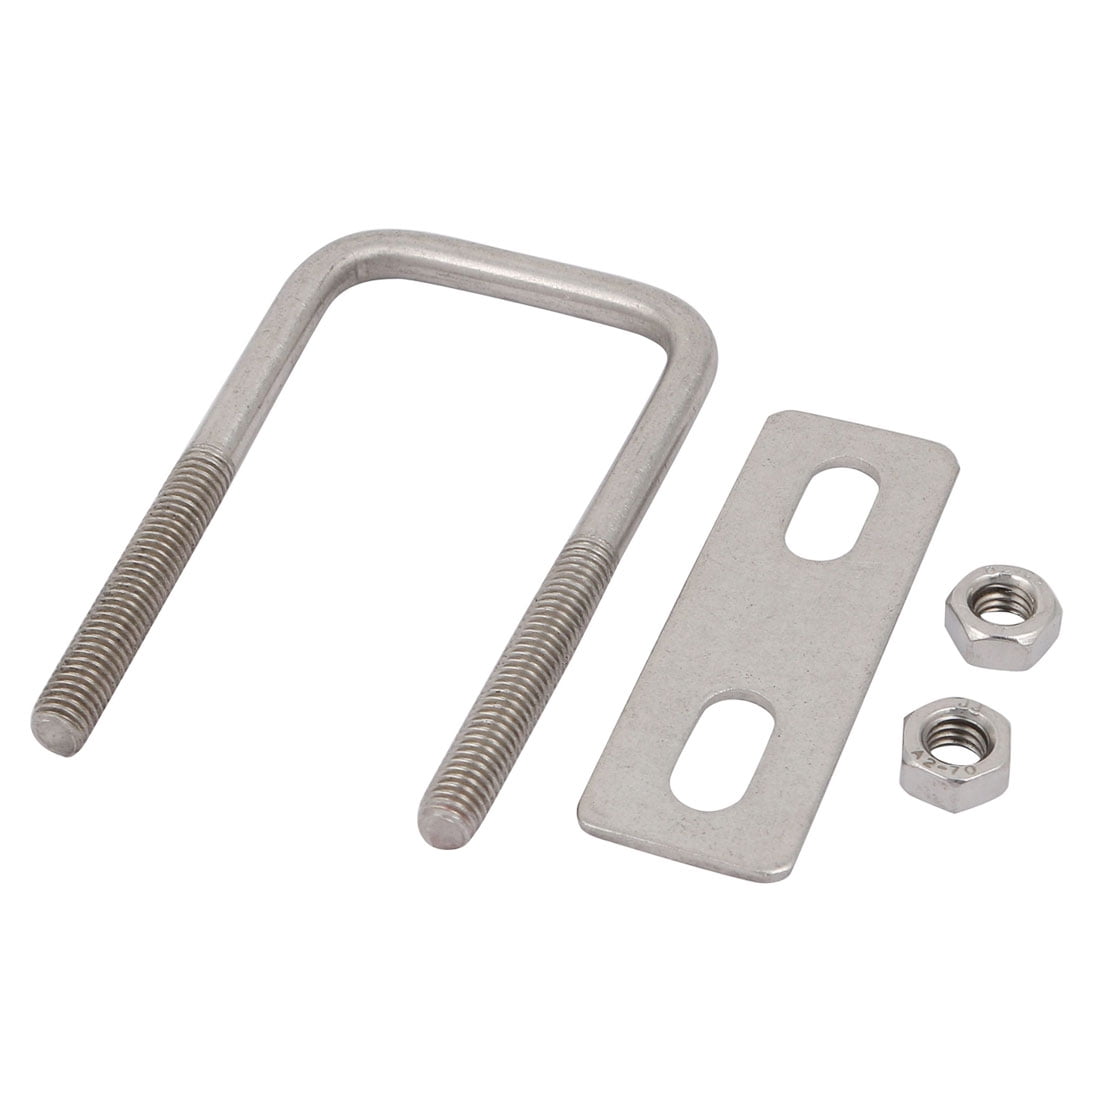 35mm 2Pcs Square U-Bolts Kits 1-3/8 Inner Width 304 Stainless Steel M6 w Nuts Frame Straps Automotive Replacement 